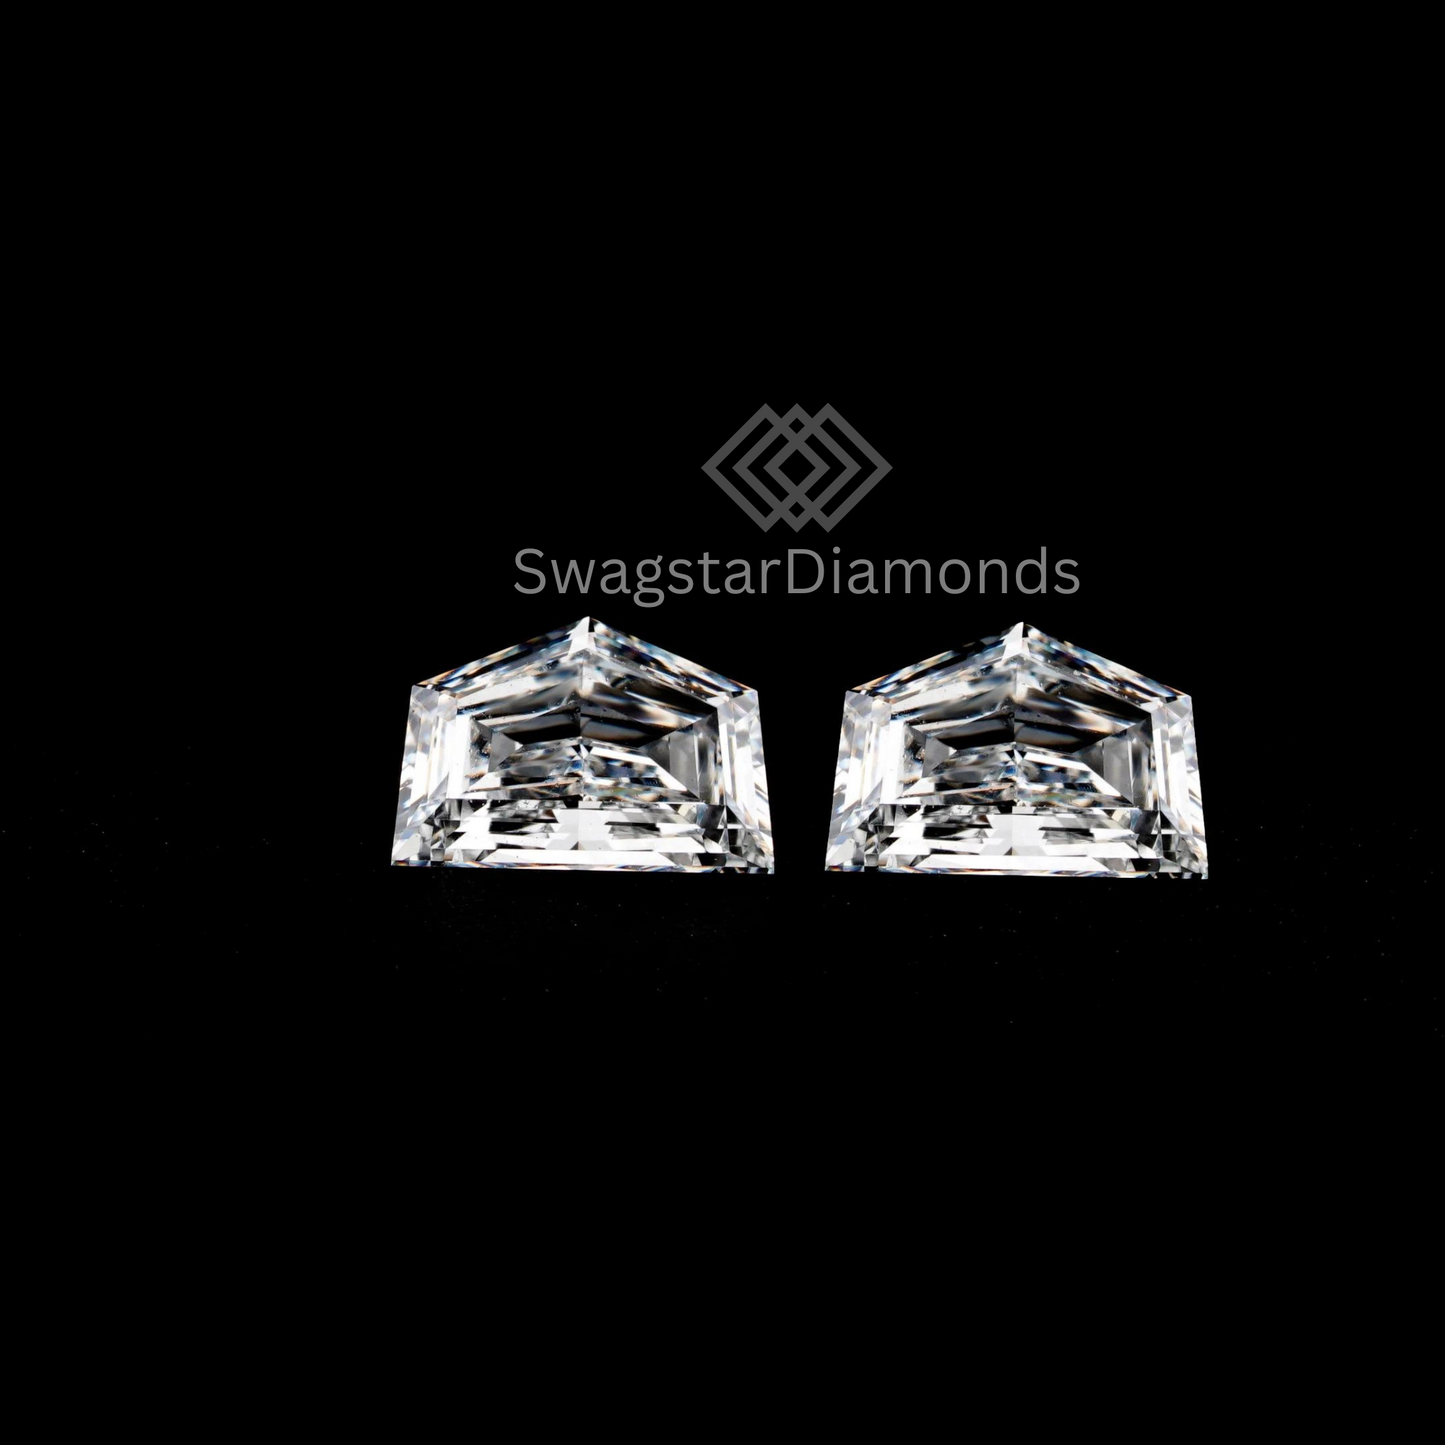 Cadillac Step Cut With Lab-Grown & Natural Diamonds, Jewelry By Leading Manufacturer From Swagstar, Surat. Explore Wedding, Engagement, Eternity Rings, Earring & Studs, Bracelets In 10k, 14k, & 18k Gold Varieties, Including White, Yellow, Rose Gold.